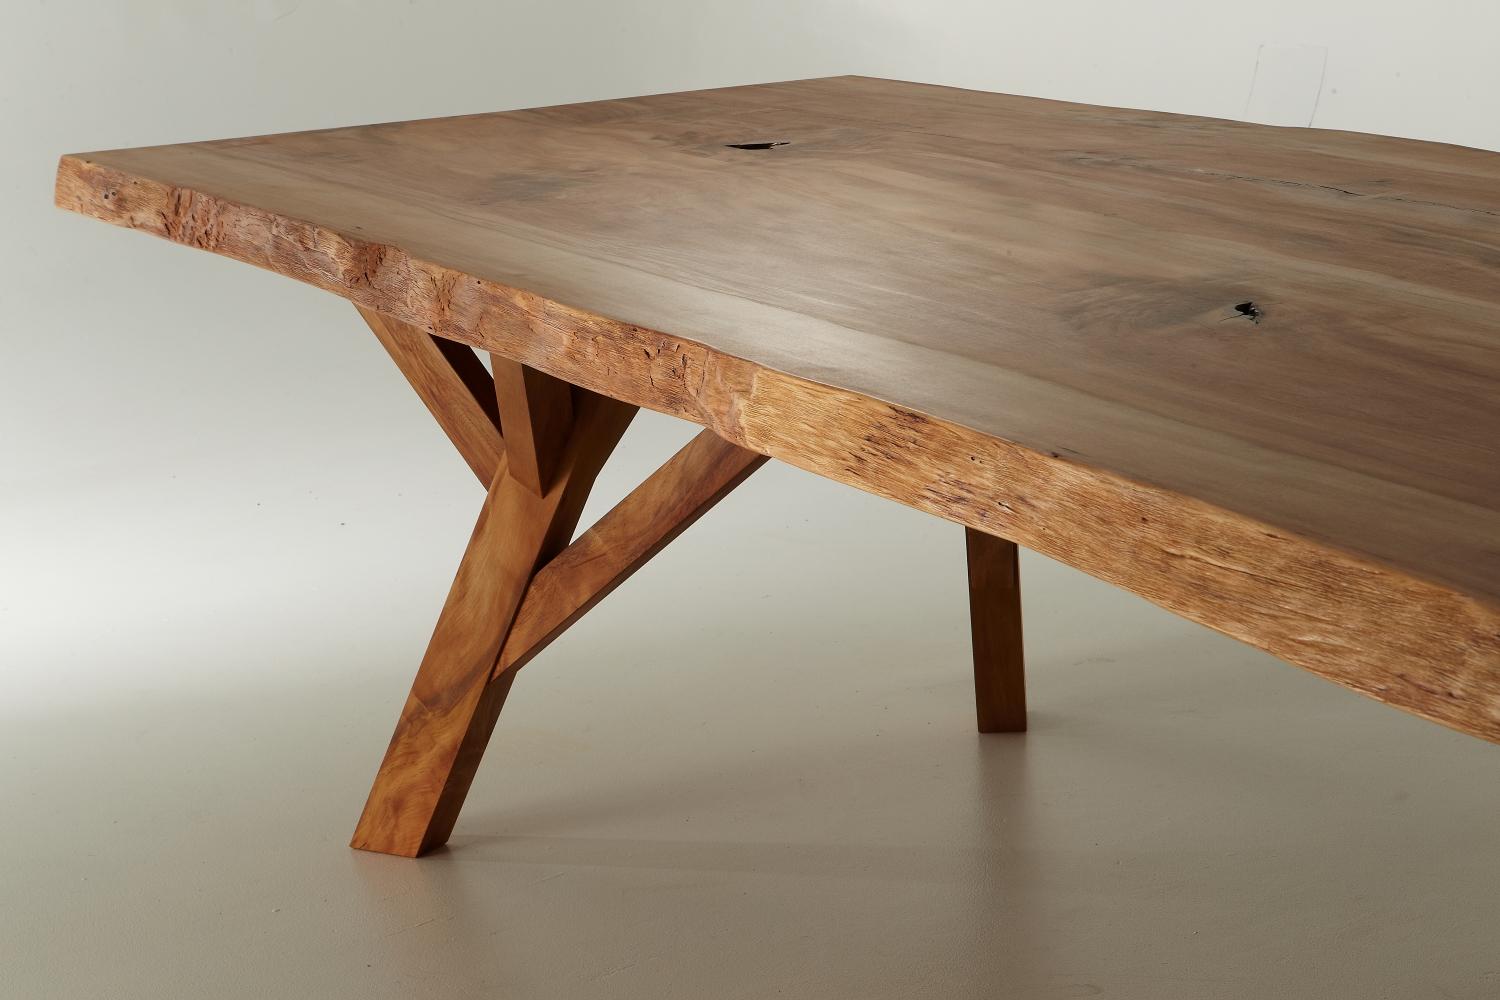 New Zealand Modern Organic Live Edge Slab Canopy Table Made from Sustainable Ancient Wood For Sale